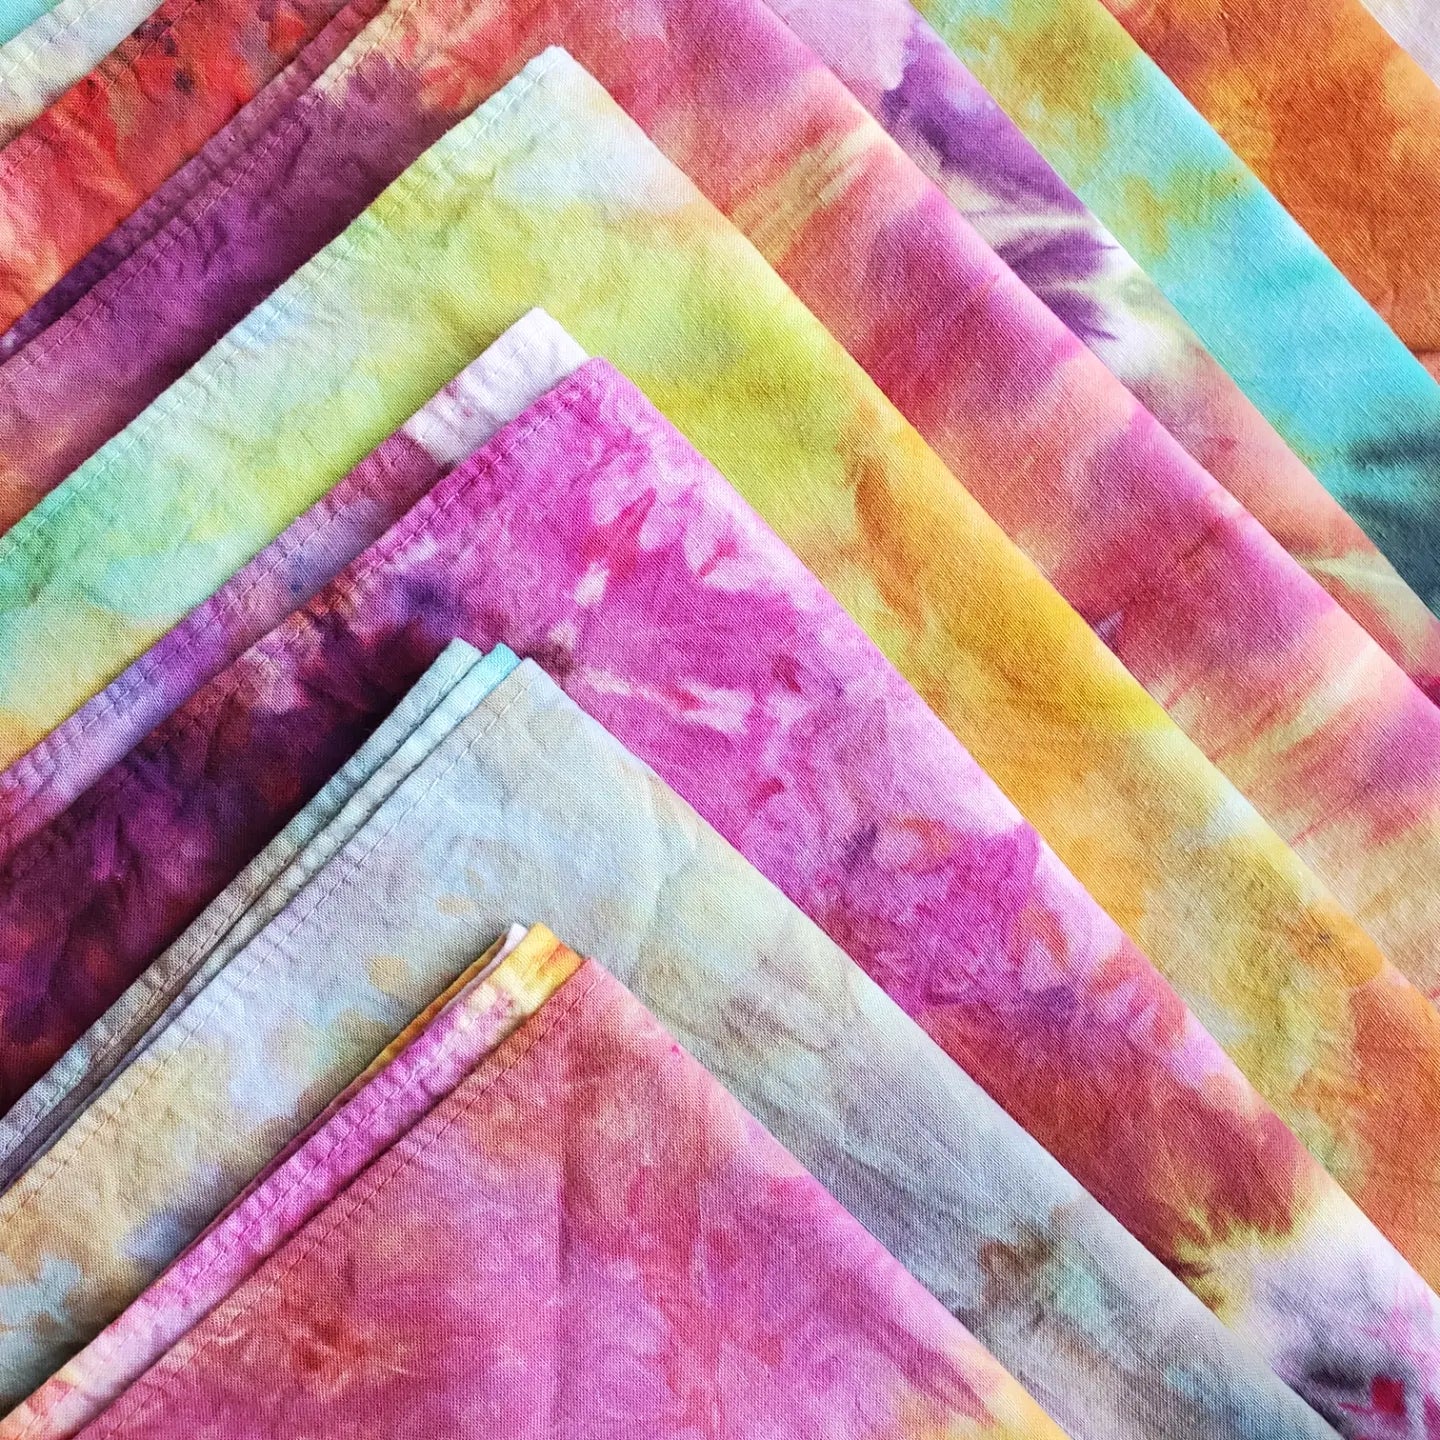 Ice Dyeing Workshop with Megan Jewel - March 4th